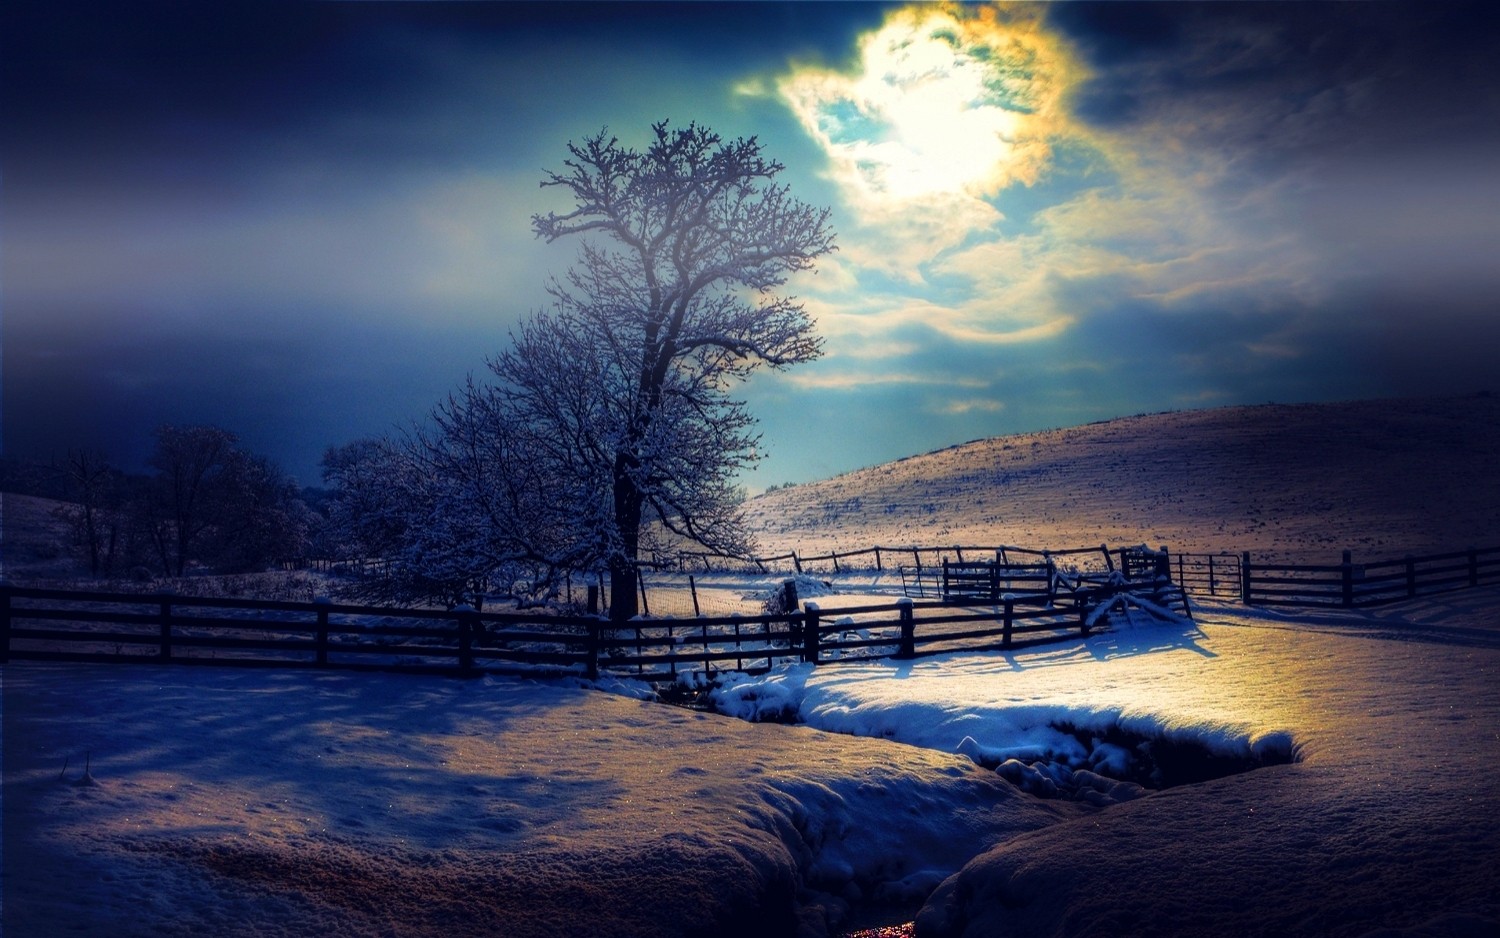 General 1500x938 nature landscape moonlight winter snow mist fence evening trees clouds